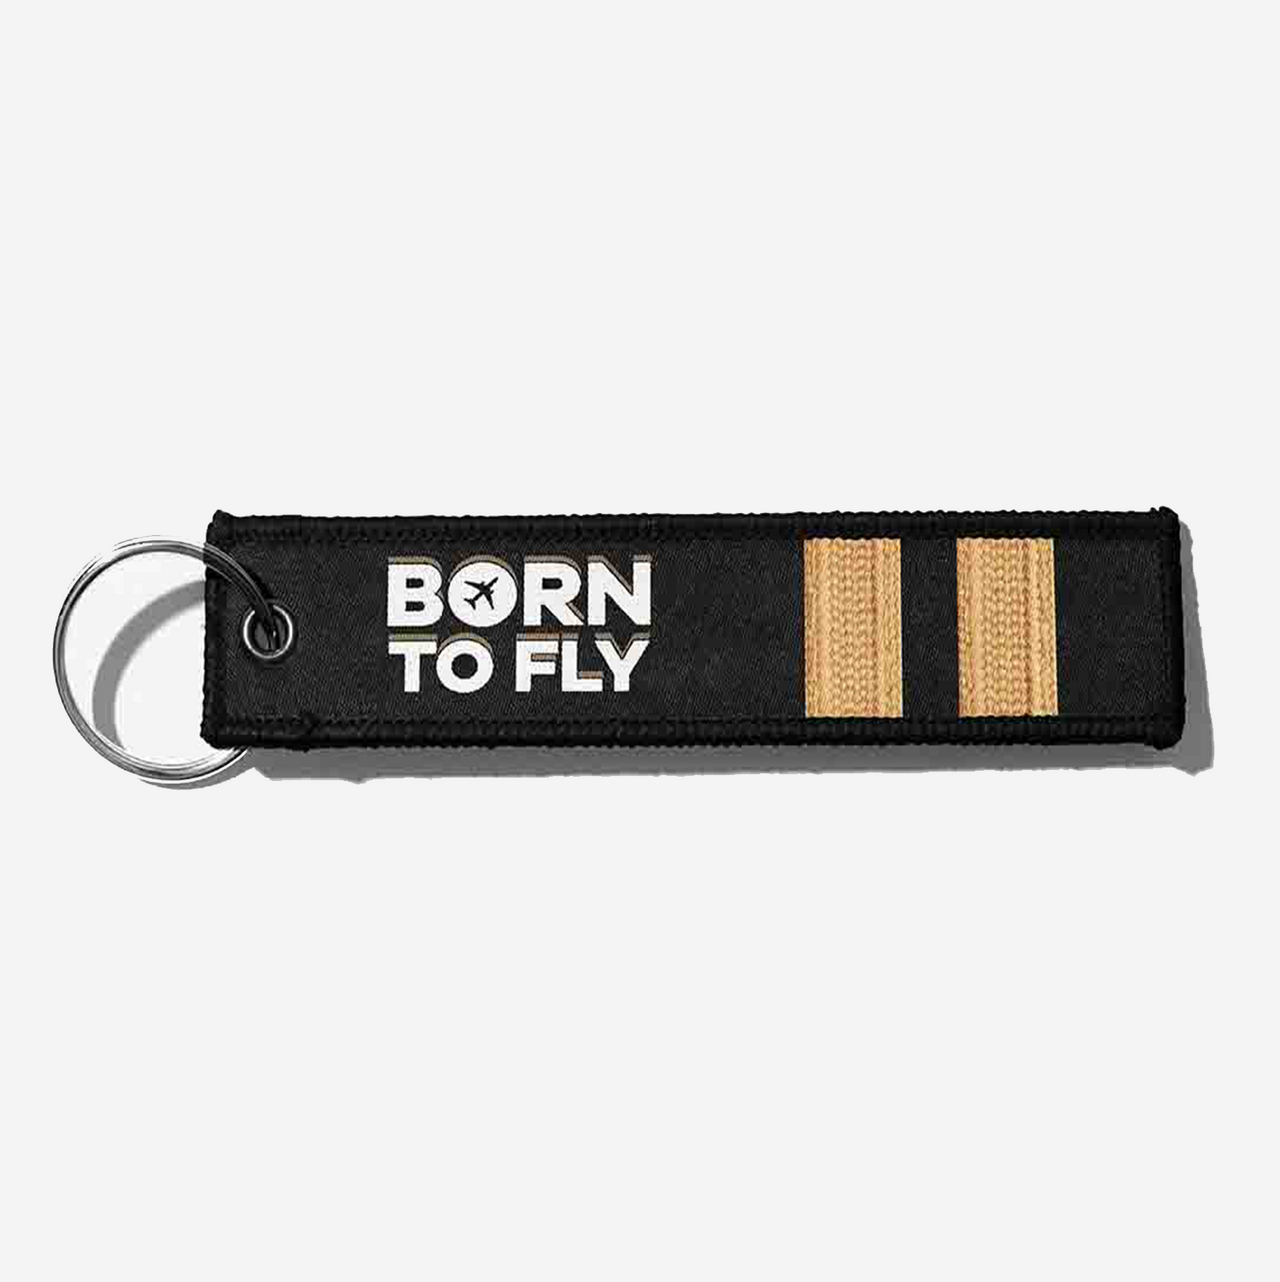 Born to Fly & Pilot Epaulettes (2 Lines) Designed Key Chains